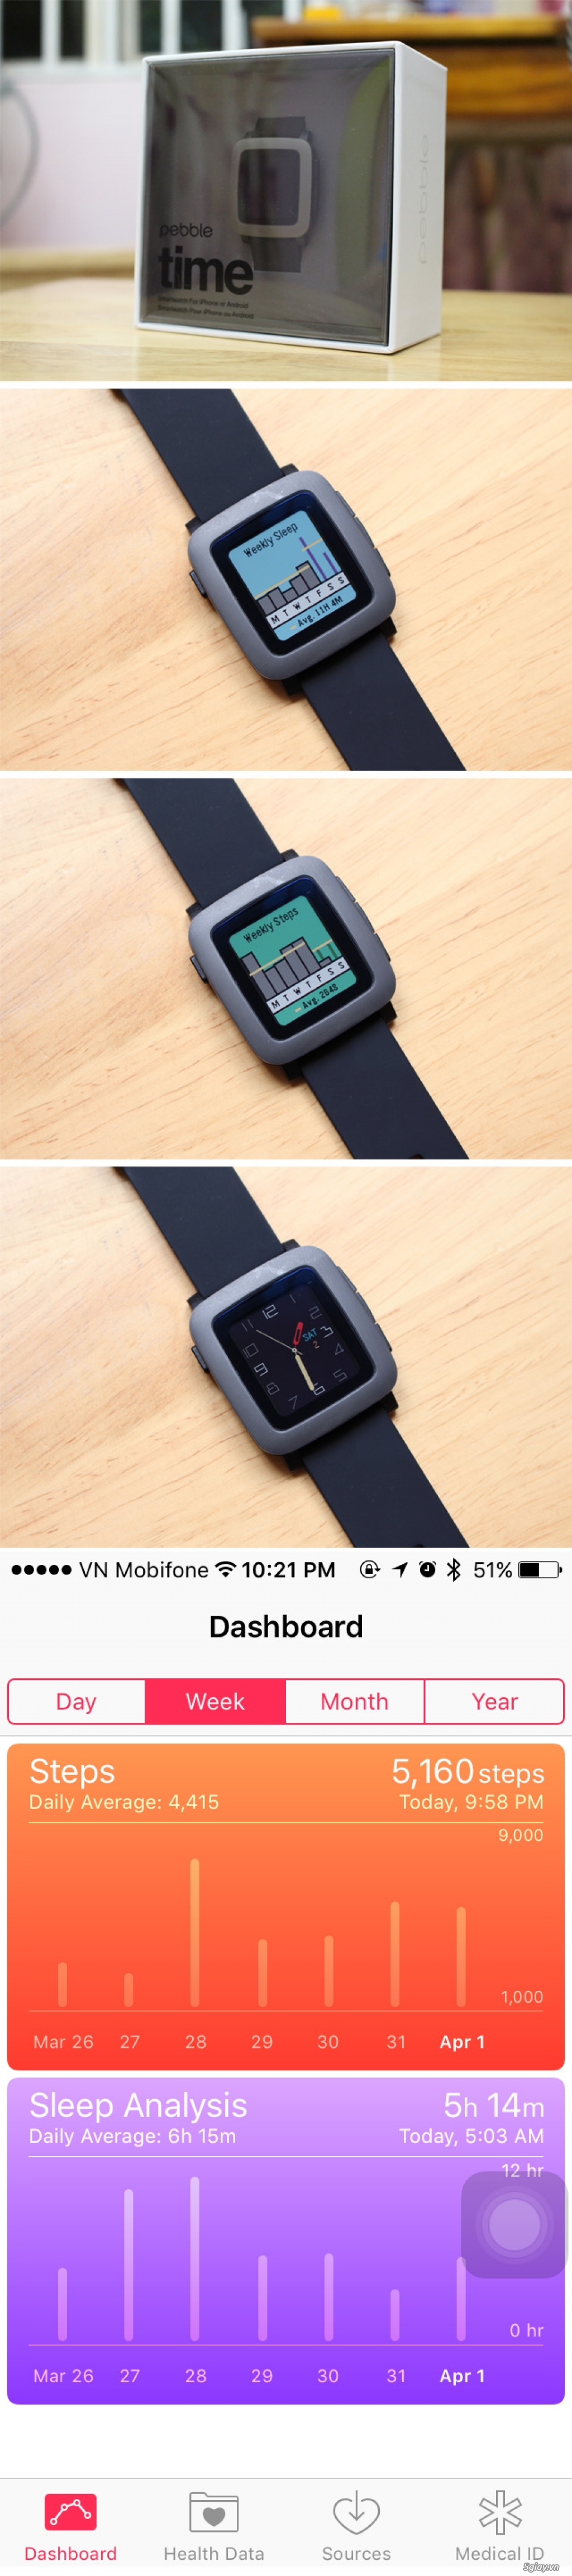 Fitbit Blaze, Pebble Time Round/ Time/ Classic, Asus Zenwatch 2, Timex Scout, Timex Field